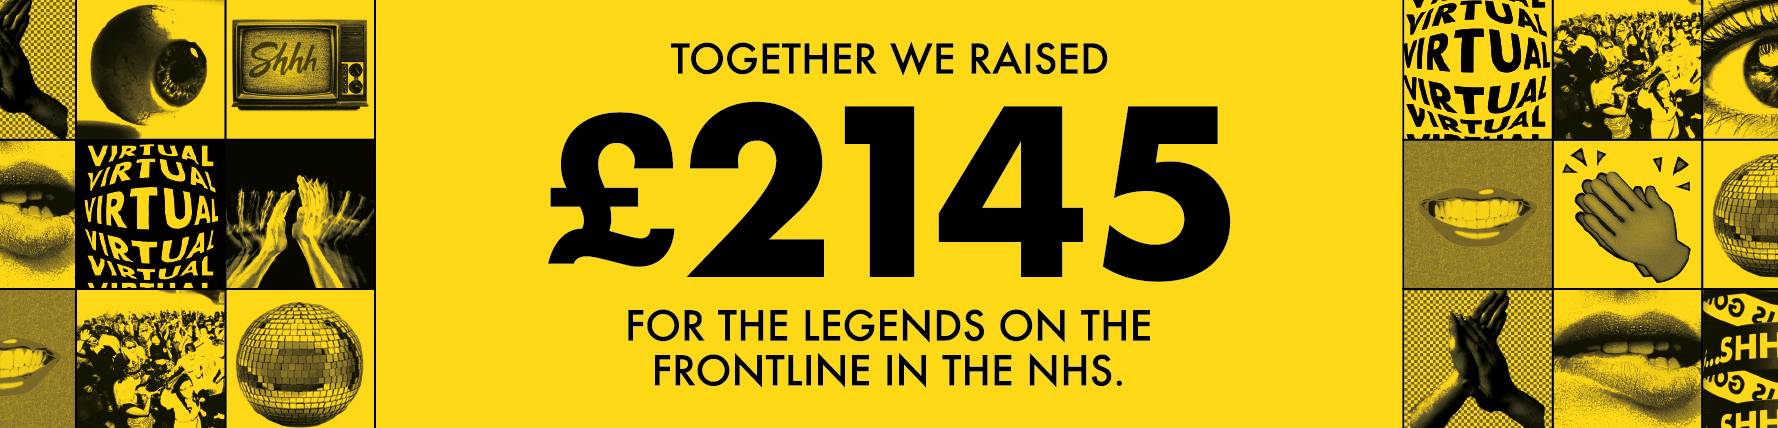 Shhh… raised £2145 for the NHS!